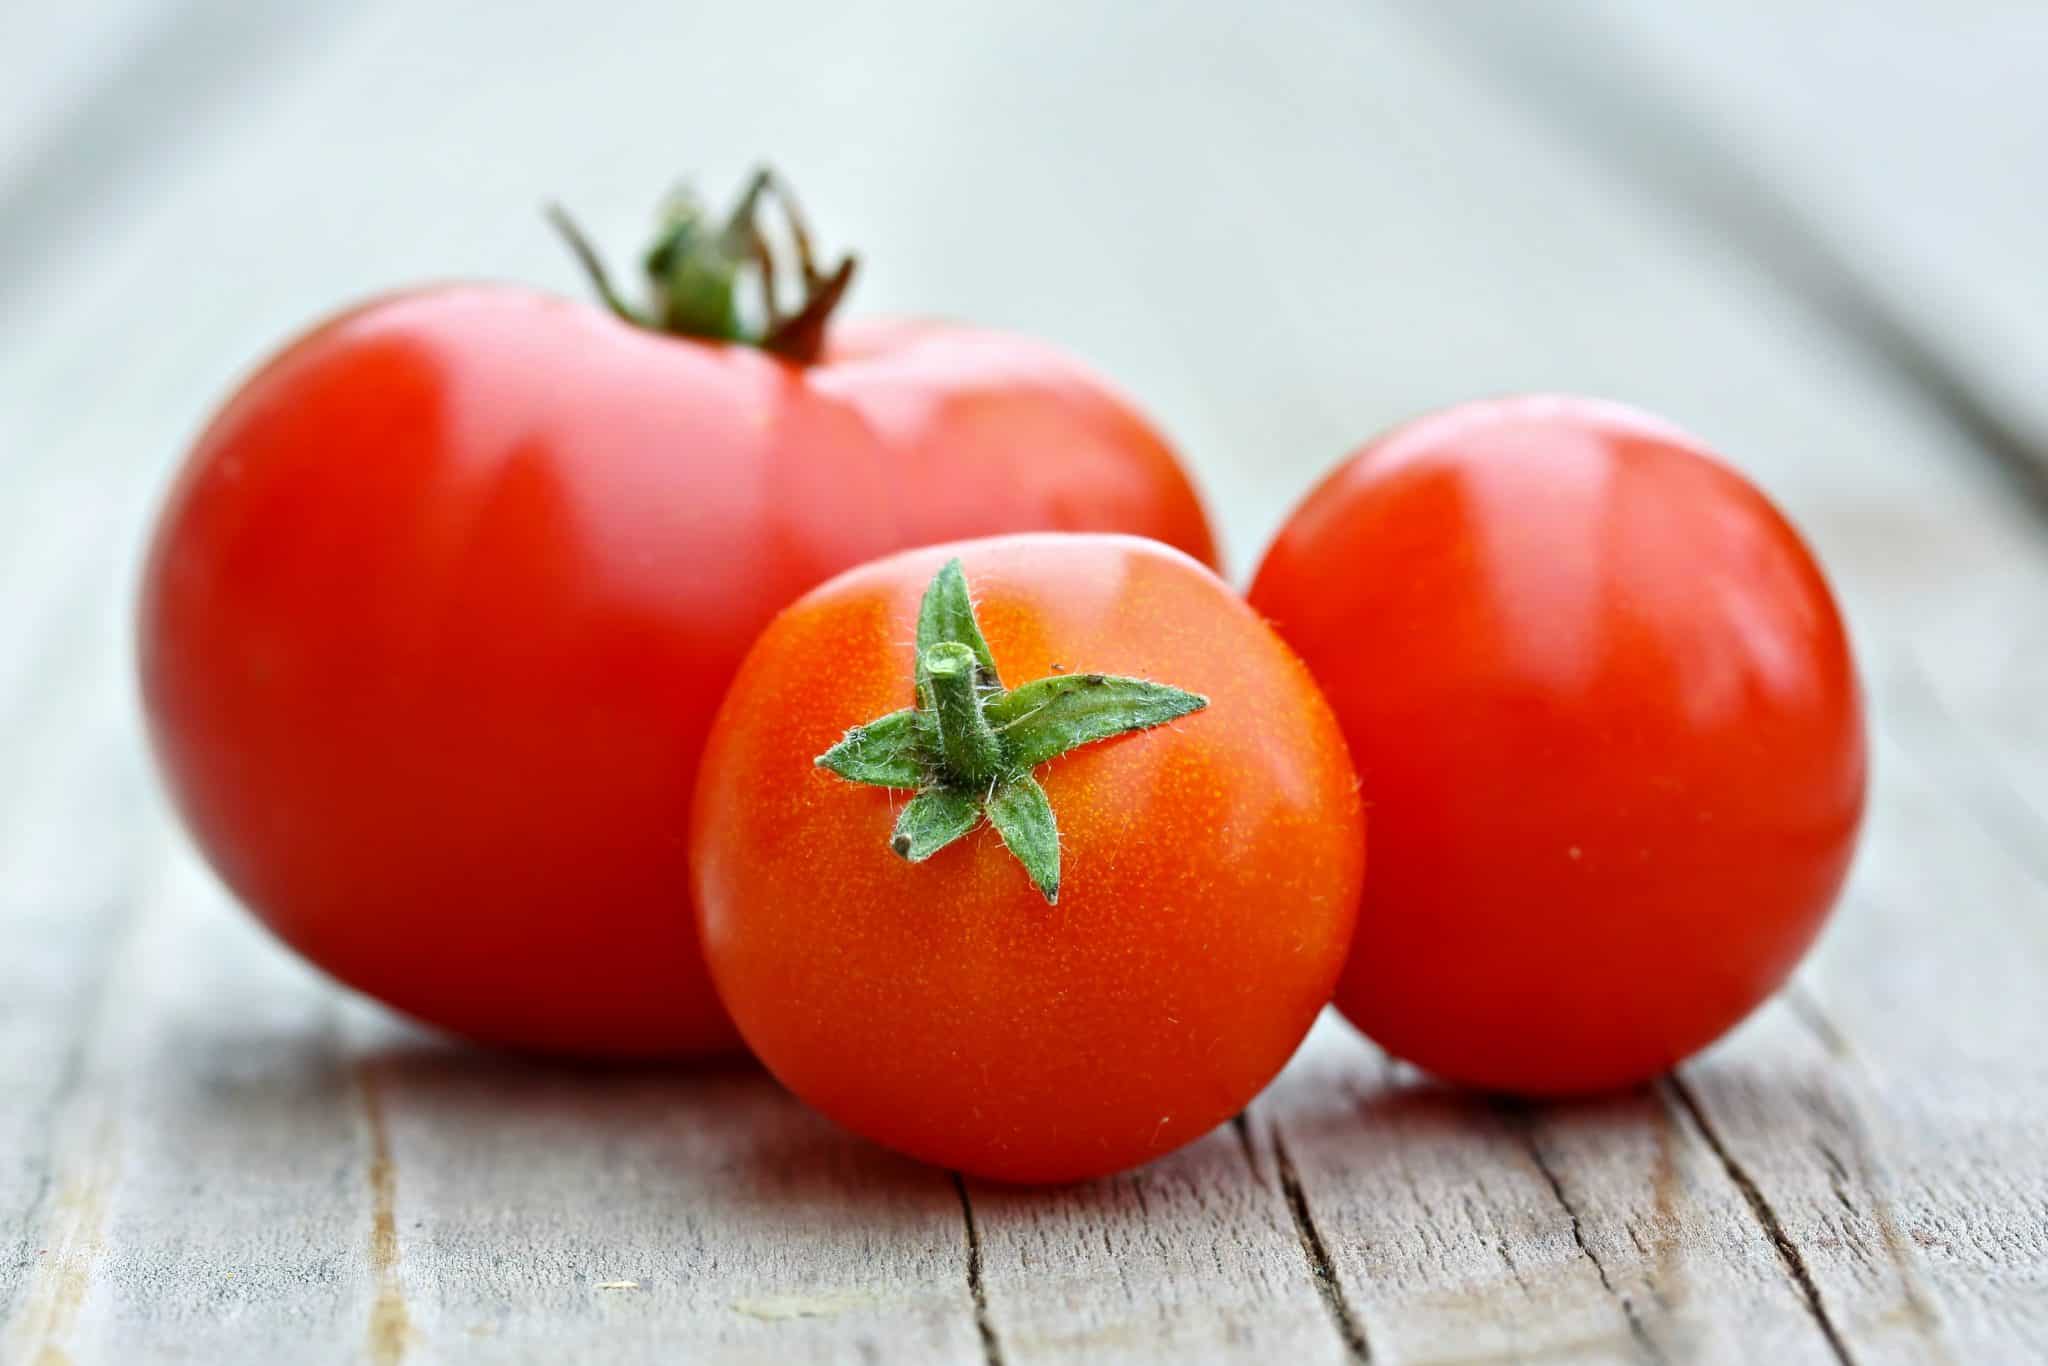 Learn how to peel a tomato in just a minute! Super easy without cooking the tomato. Perfect for sauces, salads and salsas! #howtopeelatomato #tomatoes www.savoryexperiments.com 